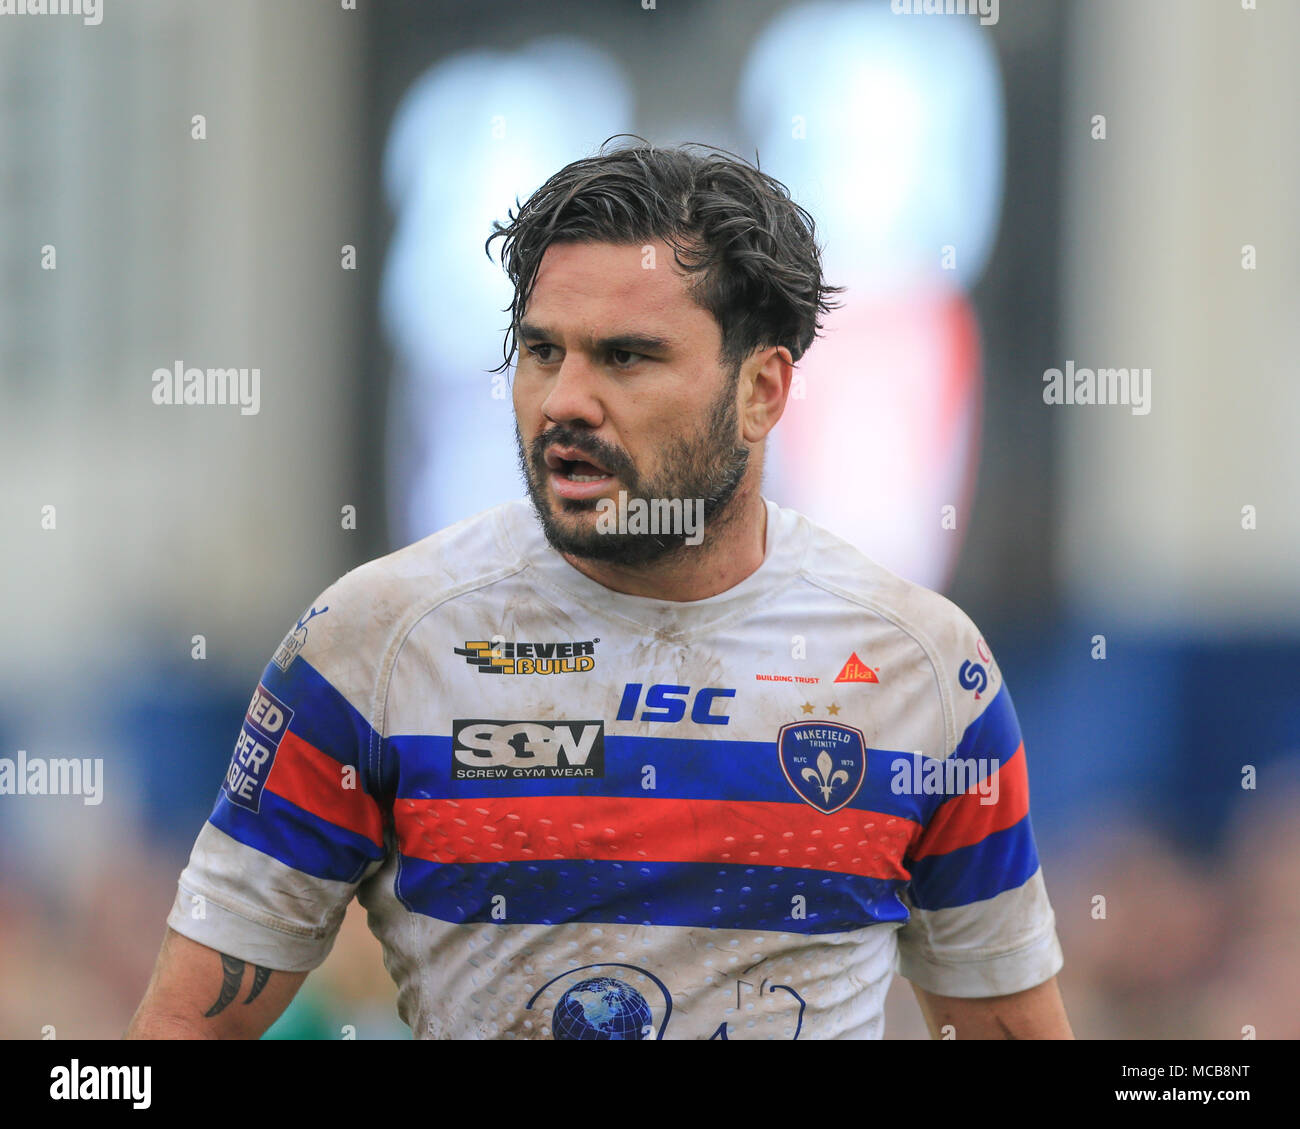 8 avril 2018, Beaumont stade juridique, Wakefield, Angleterre ; Betfred Super League rugby, Wakefield Trinity v St Helens;Justin Horo de Wakefield Trinity Credit : Nouvelles Images/Alamy Live News Banque D'Images